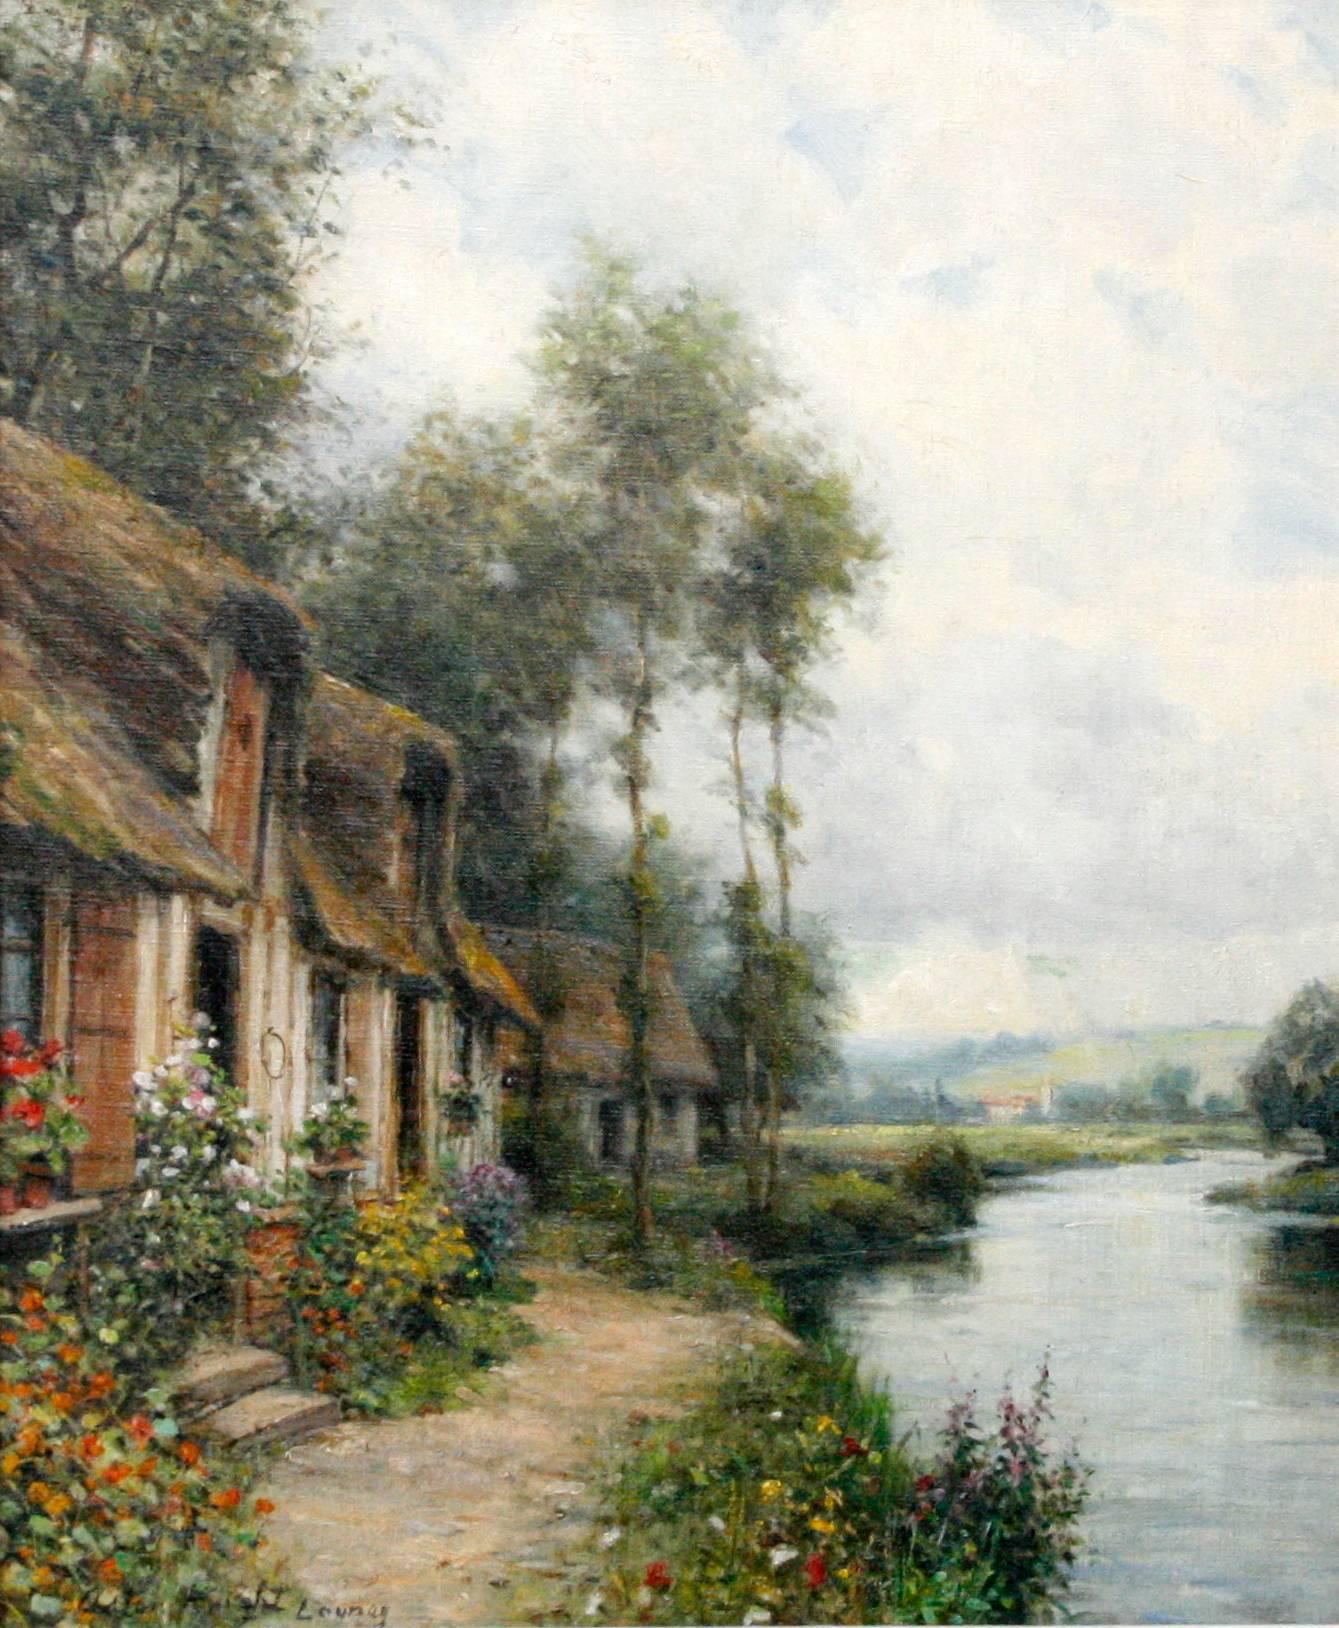 Afternoon on the River - Painting by Louis Aston Knight